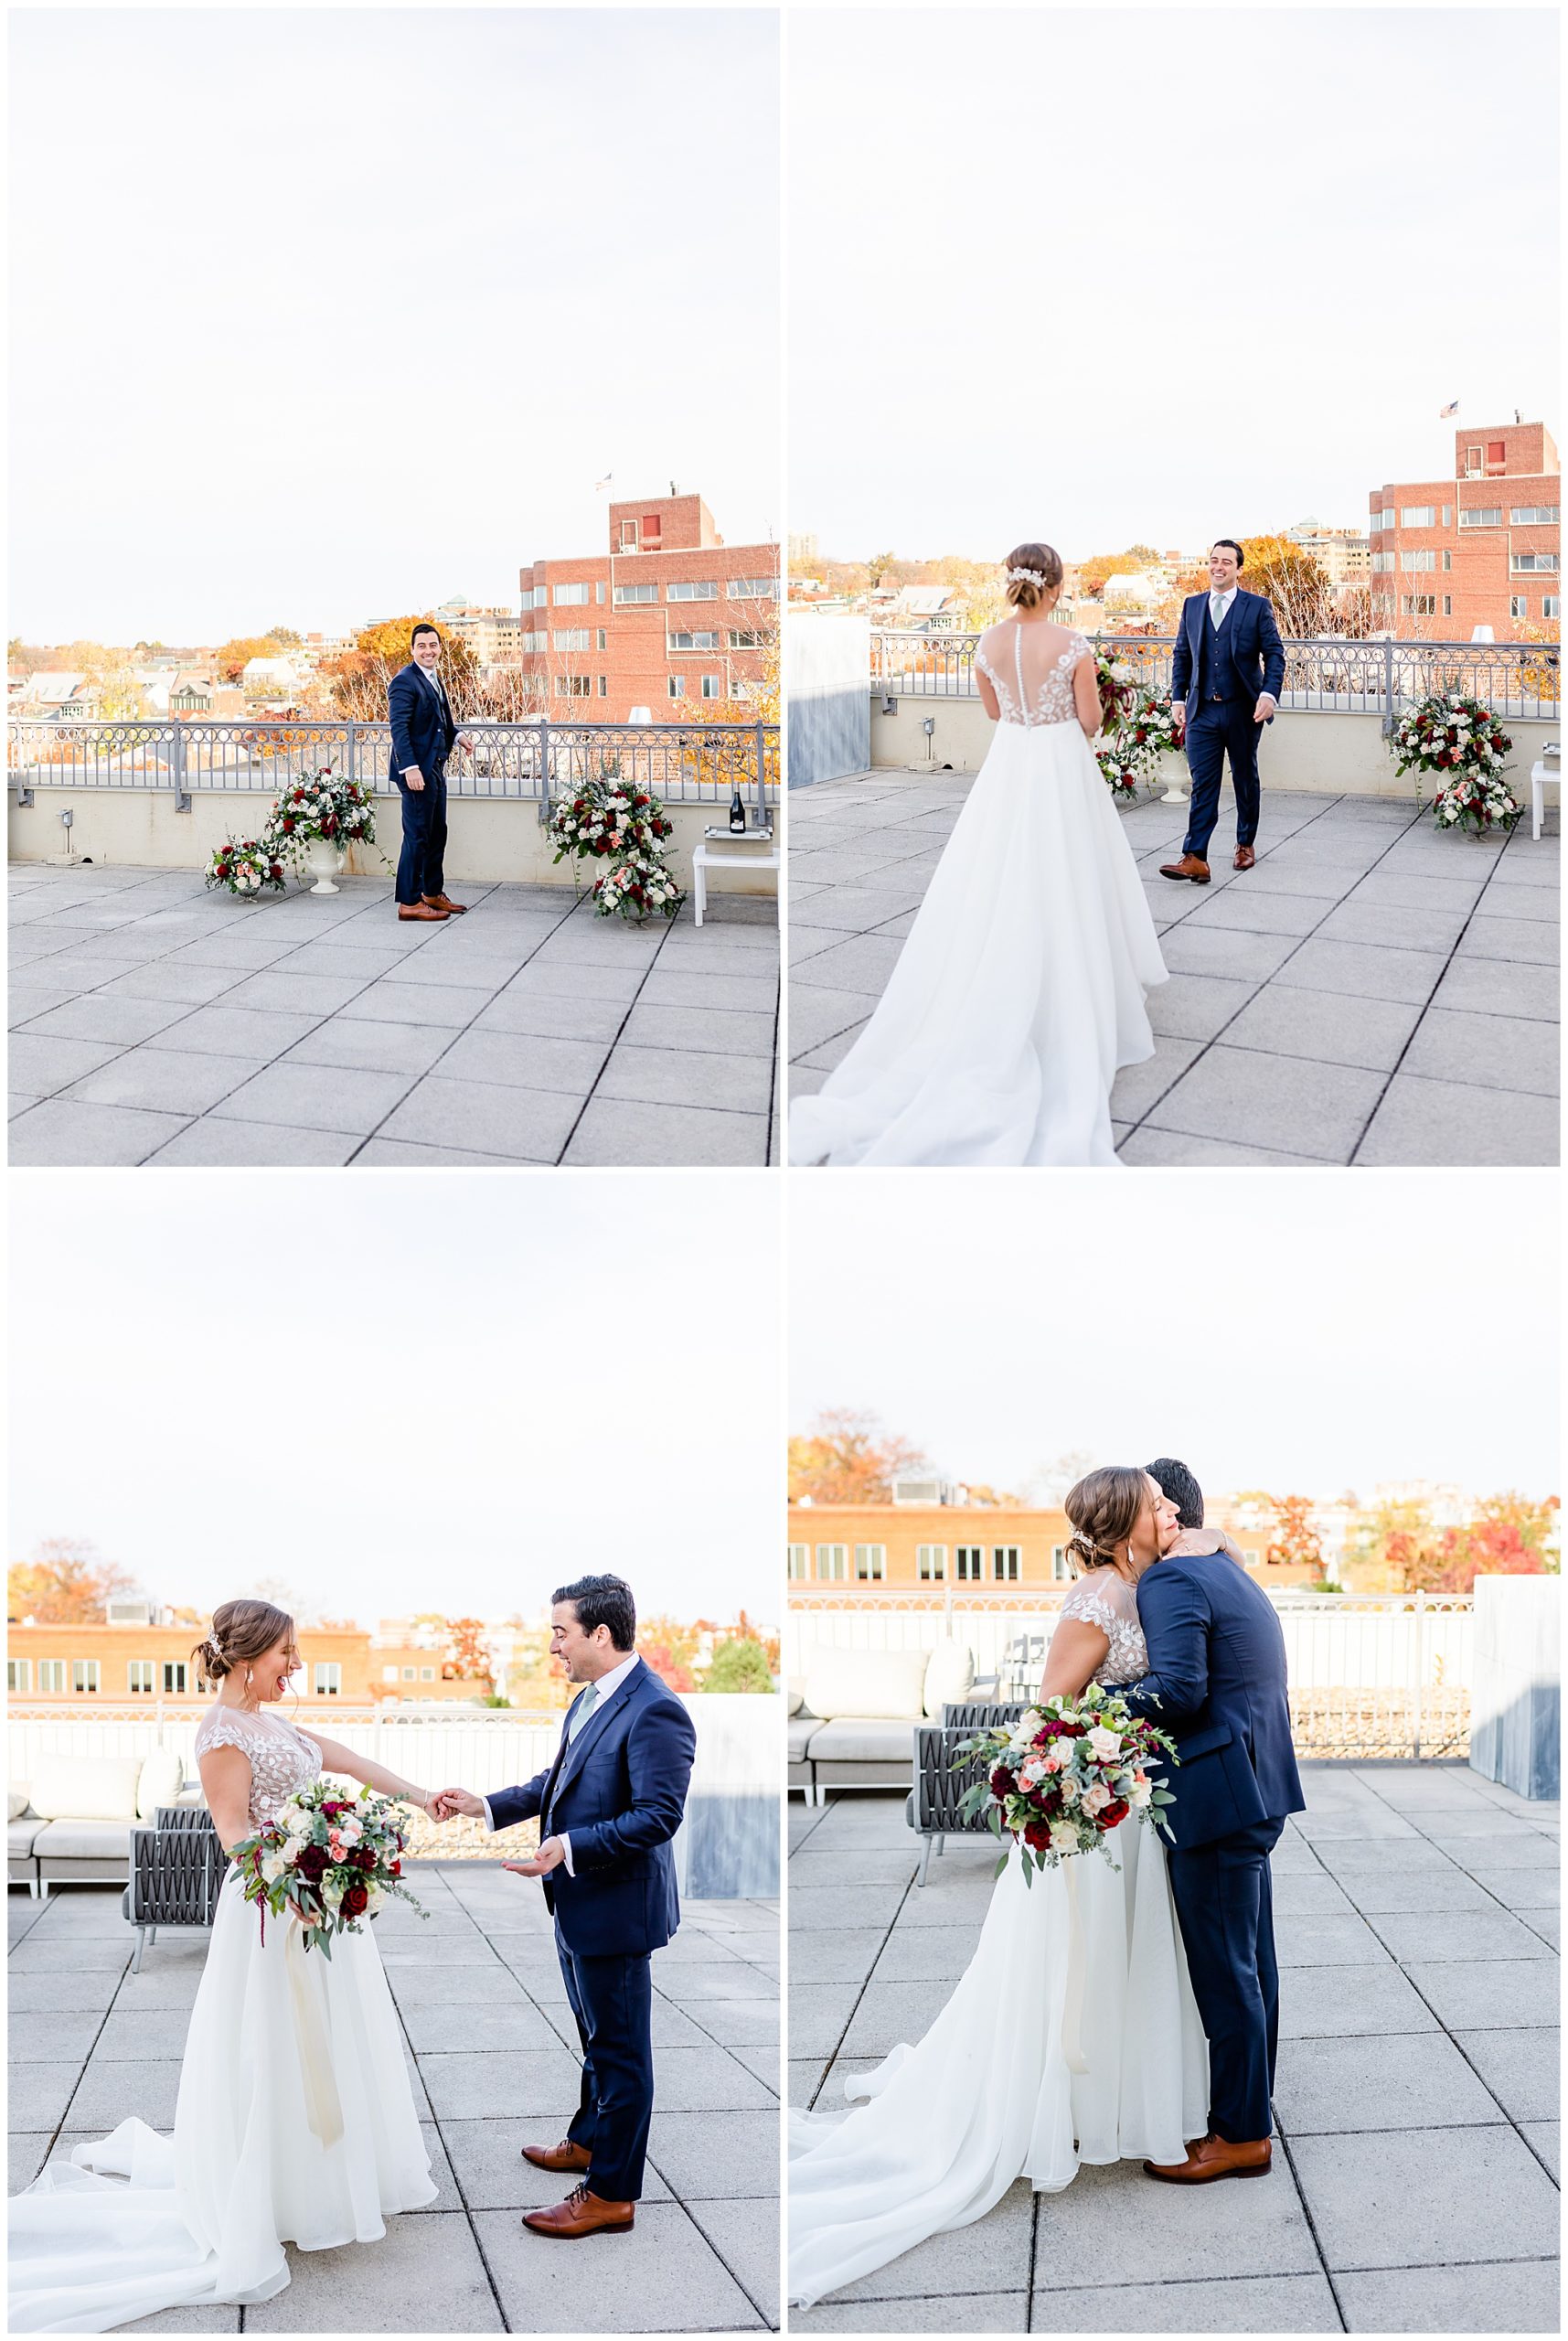 Lorien Alexandria winter wedding, Old Town Alexandria wedding, Alexandria Virginia wedding, DC micro wedding, northern Virginia wedding photographer, Alexandria Virginia wedding photographer, DC wedding photographer, winter wedding aesthetic, Rachel E.H. Photography, bride and groom doing first look, groom standing on rooftop